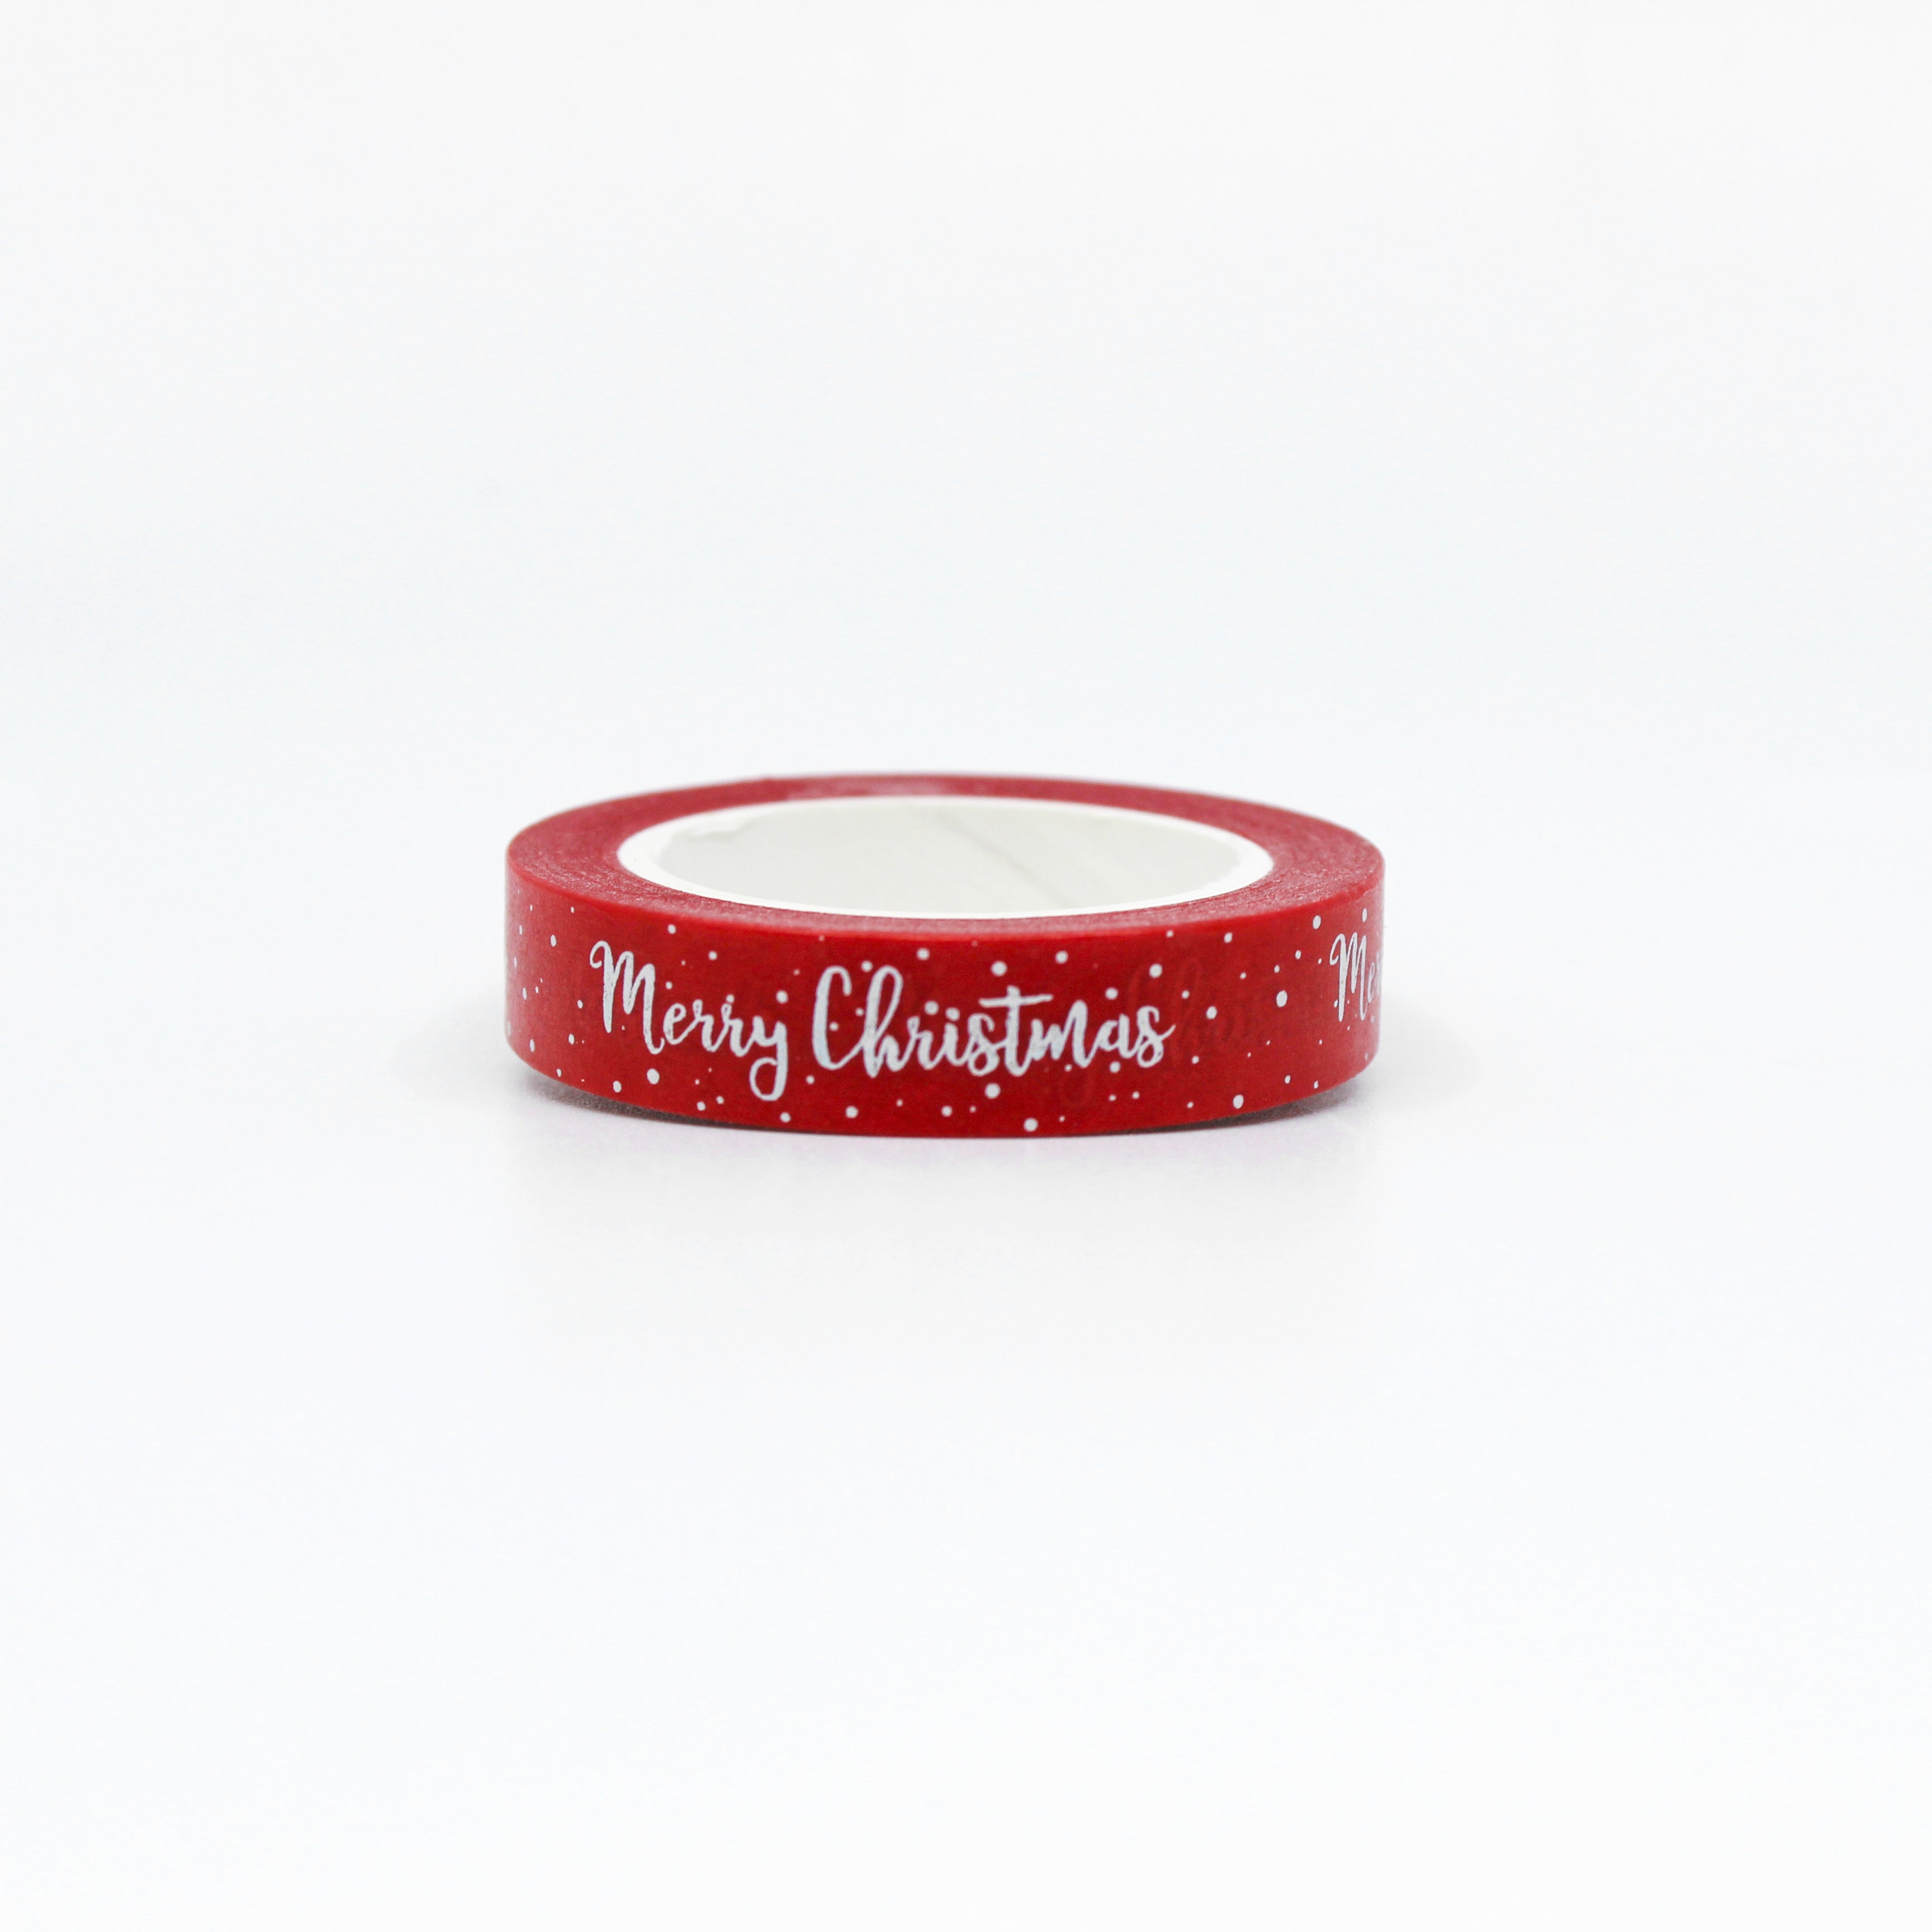 This is a cursive Merry Christmas phrase red washi tape from BBB Supplies Craft Shop